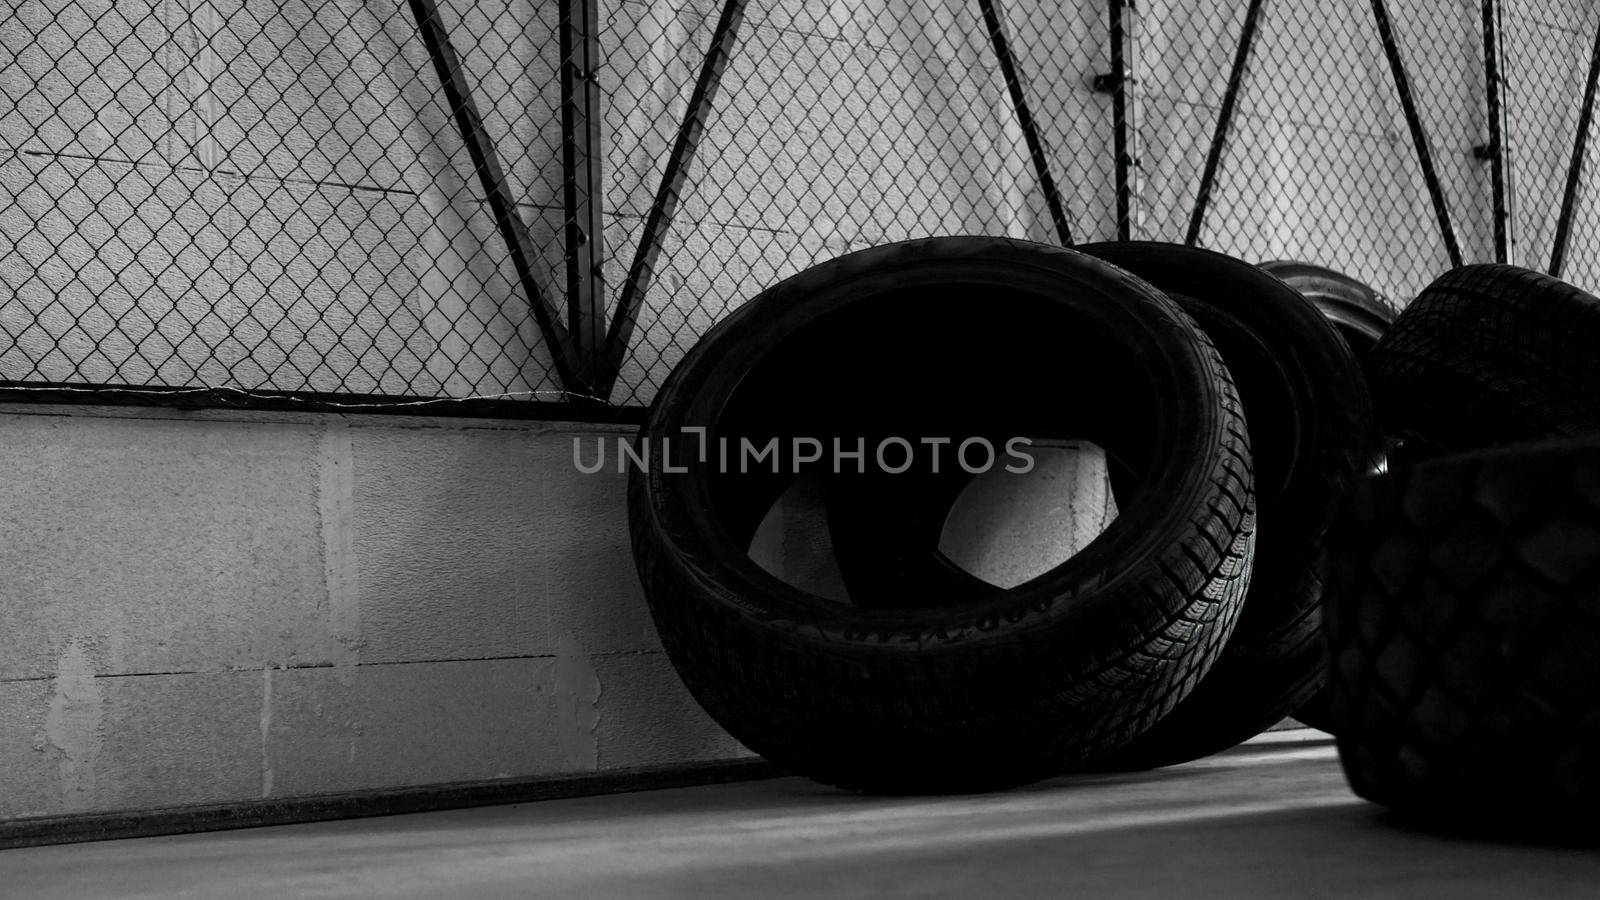 Tire warehouse. Four tires on the concrete floor. Black mesh on the wall. Brutal photo